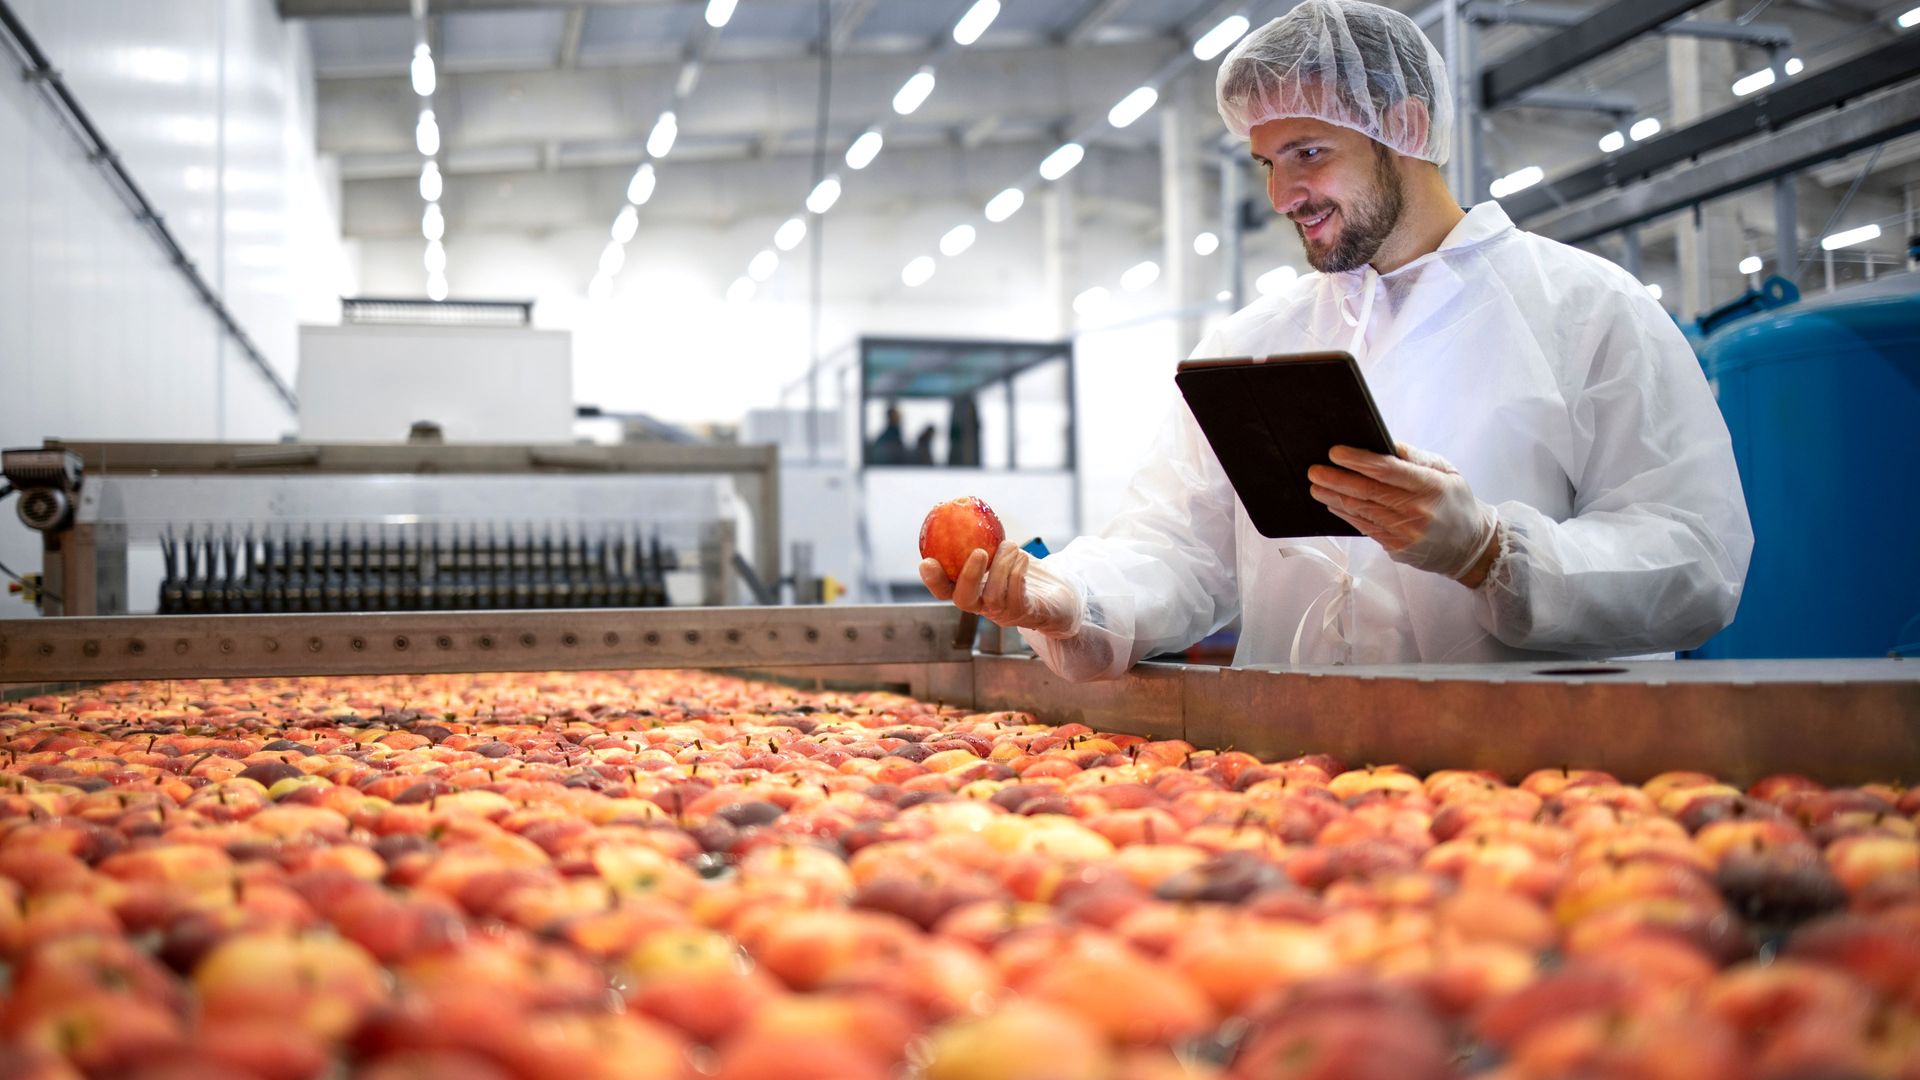 Image of a supply chain processor washing and sorting apples